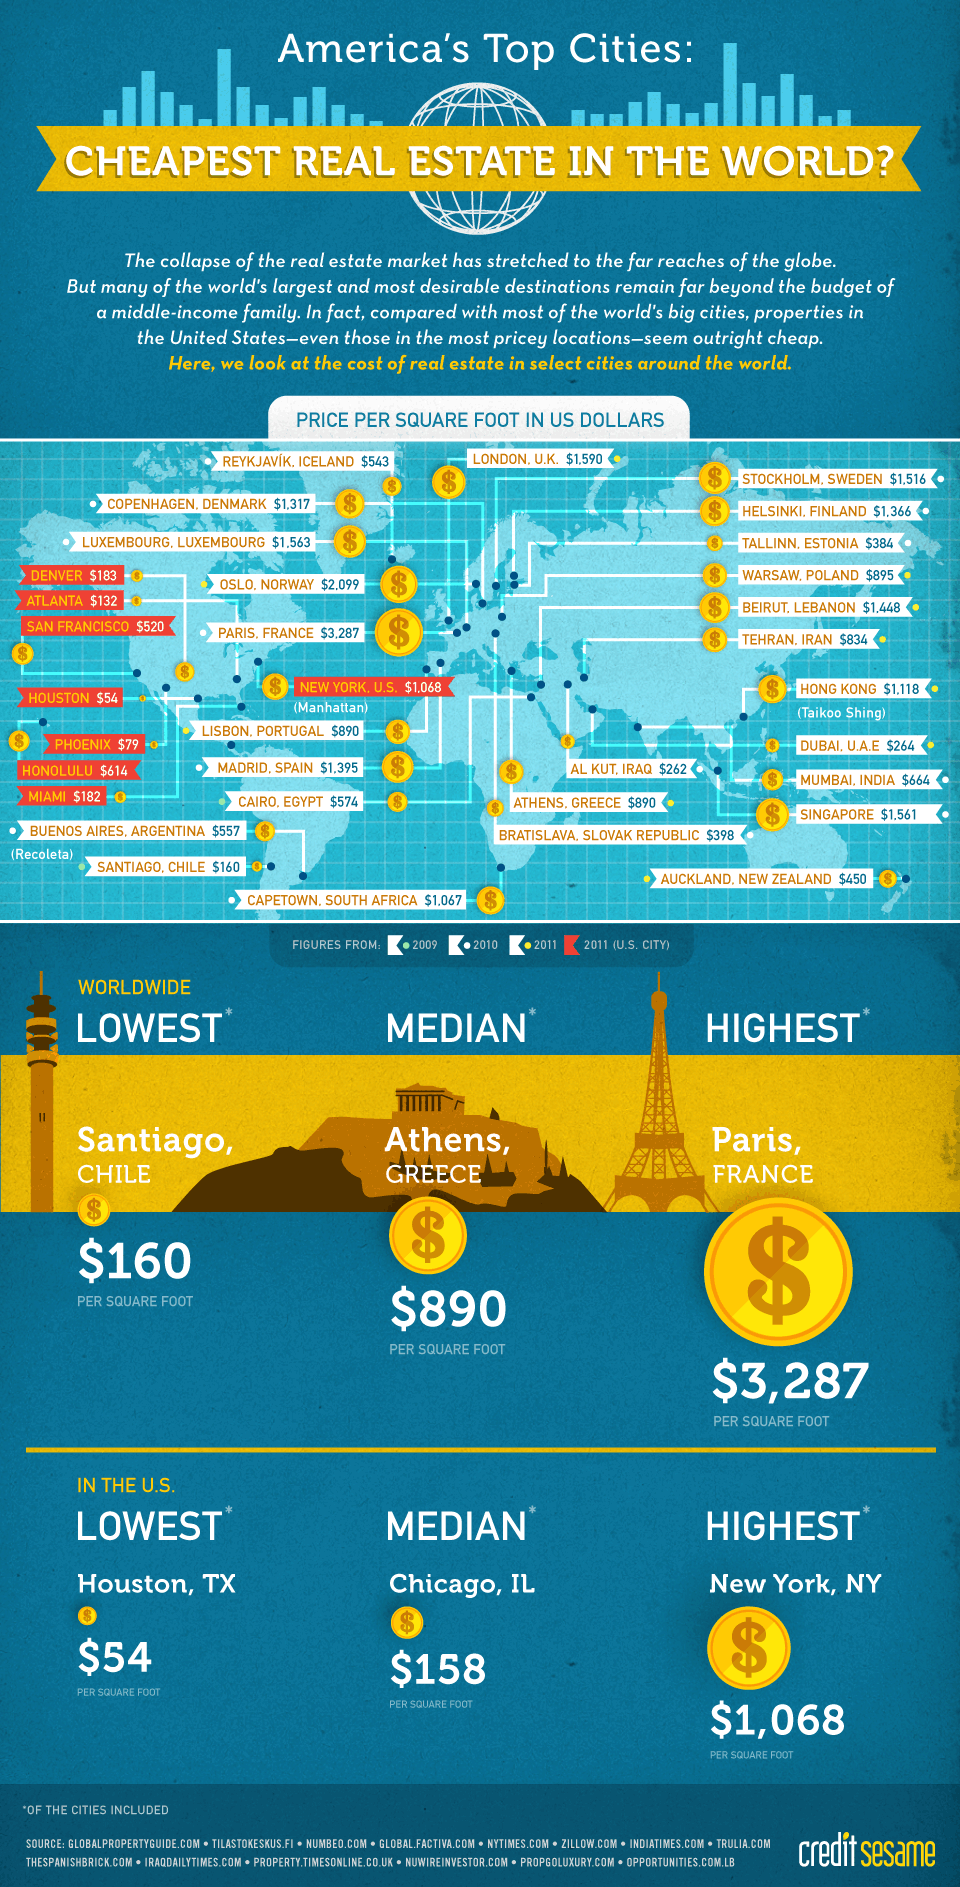 Real Estate Infographic Provided By CreditSesame.com